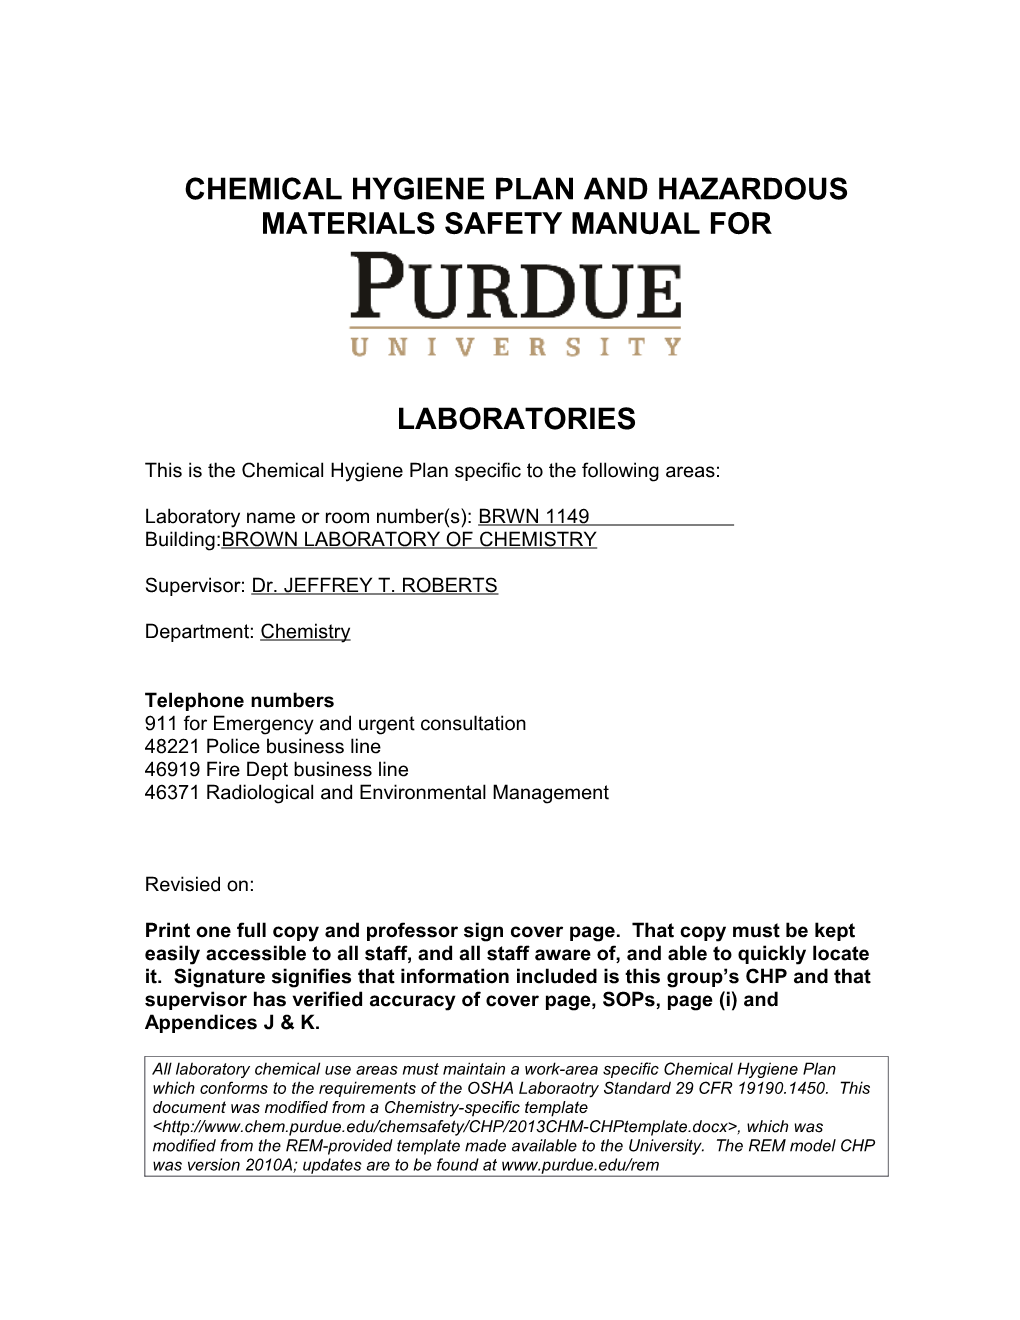 Chemical Hygiene Plan and Hazardous Materials Safety Manual For